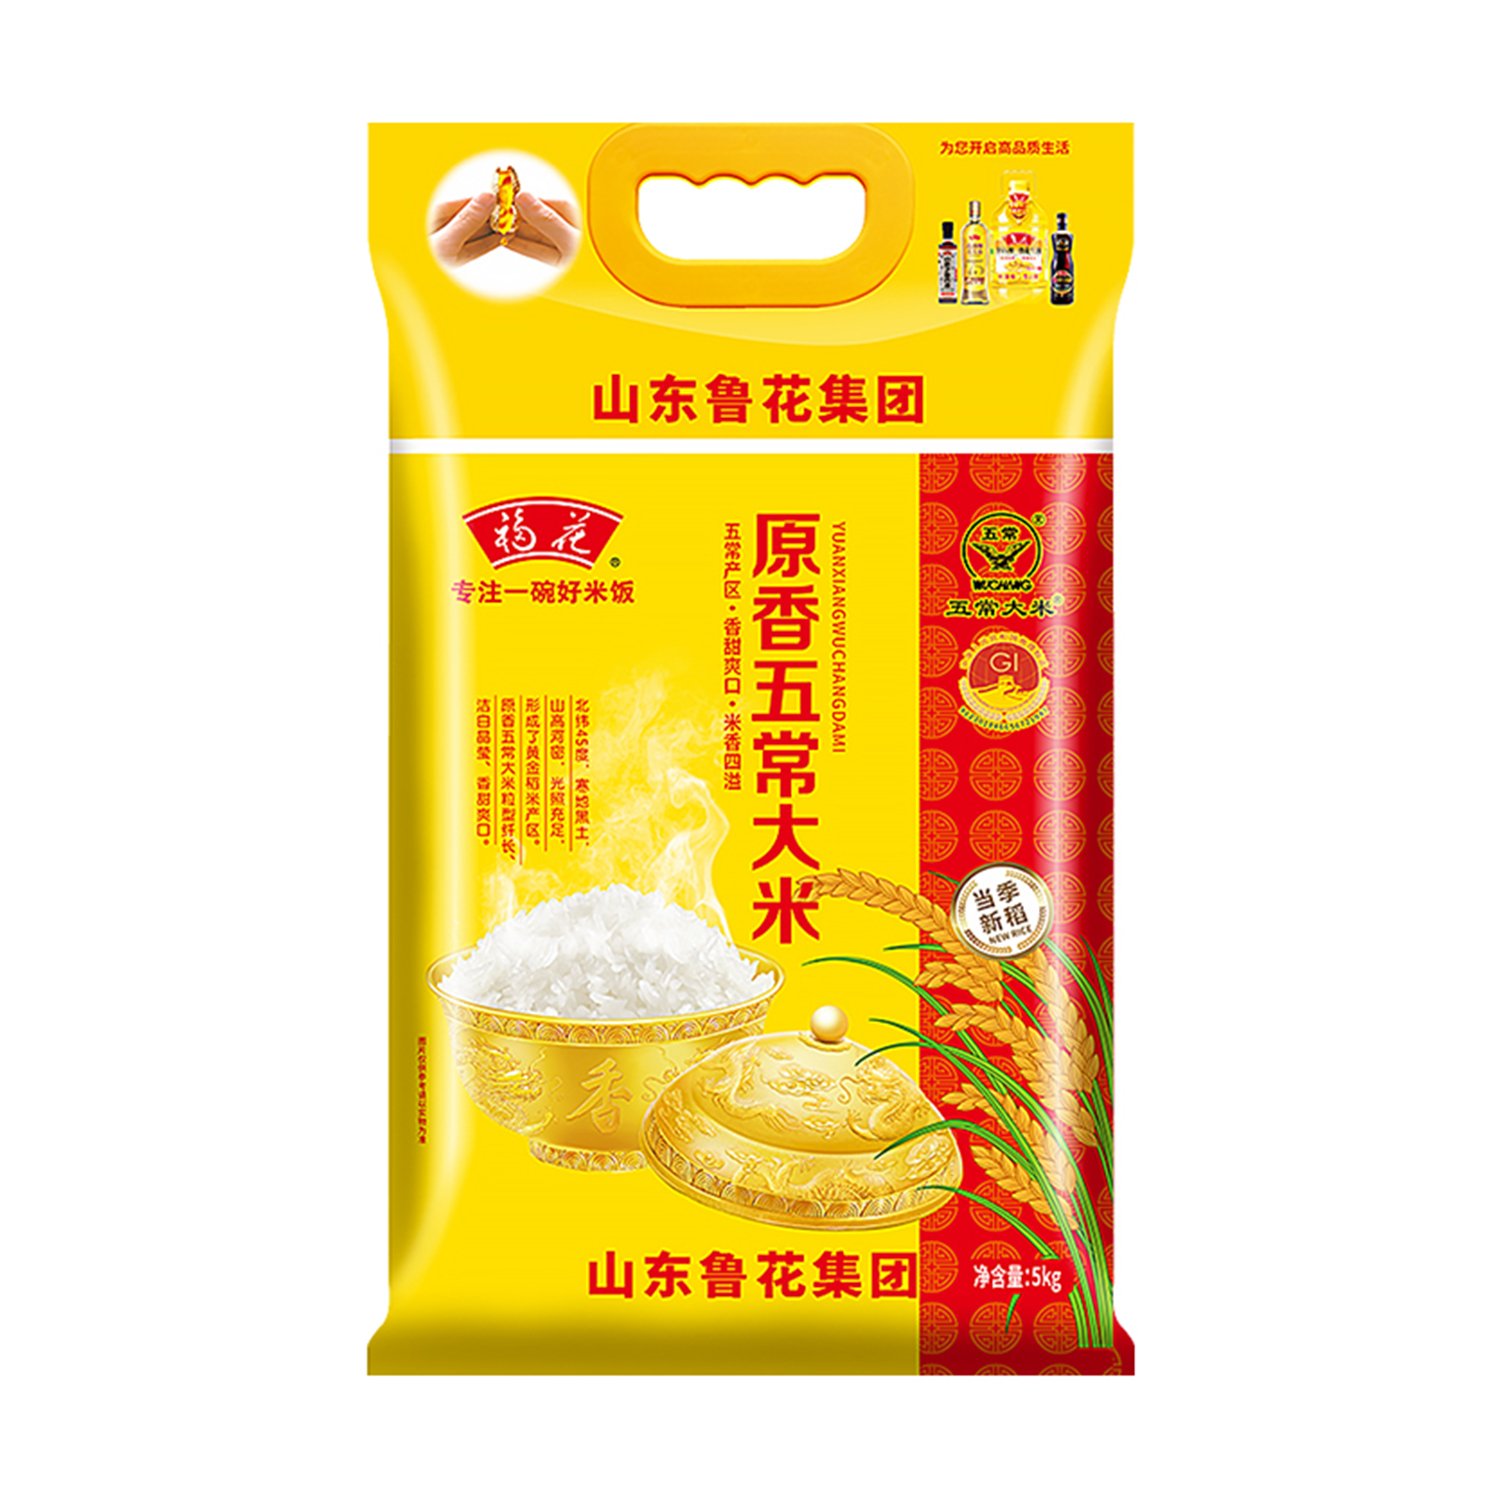 Luhua Wuchang Rice 5kg-eBest-Weekly Special,Rice,Pantry